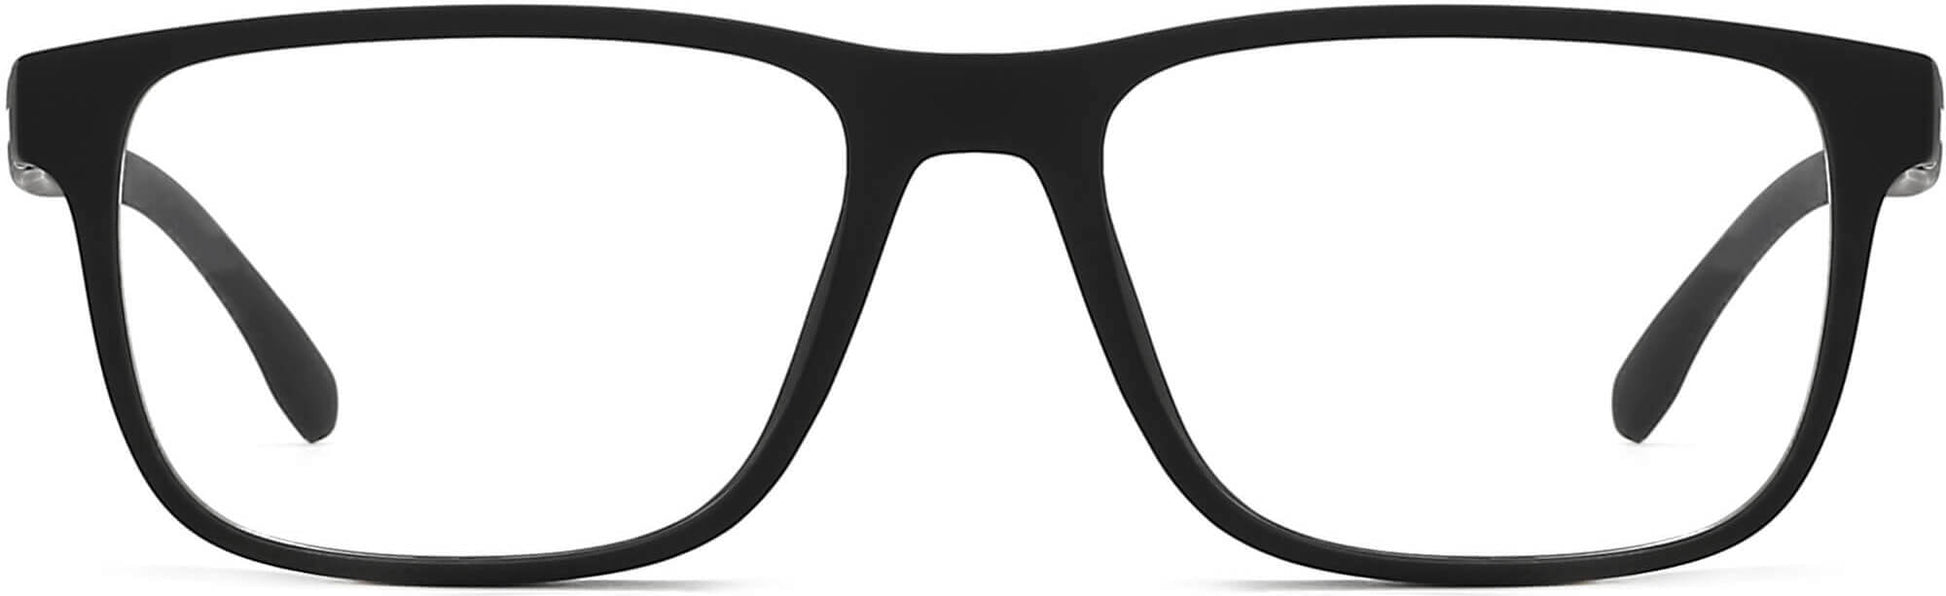 Martin Rectangle Black Eyeglasses from ANRRI, front view